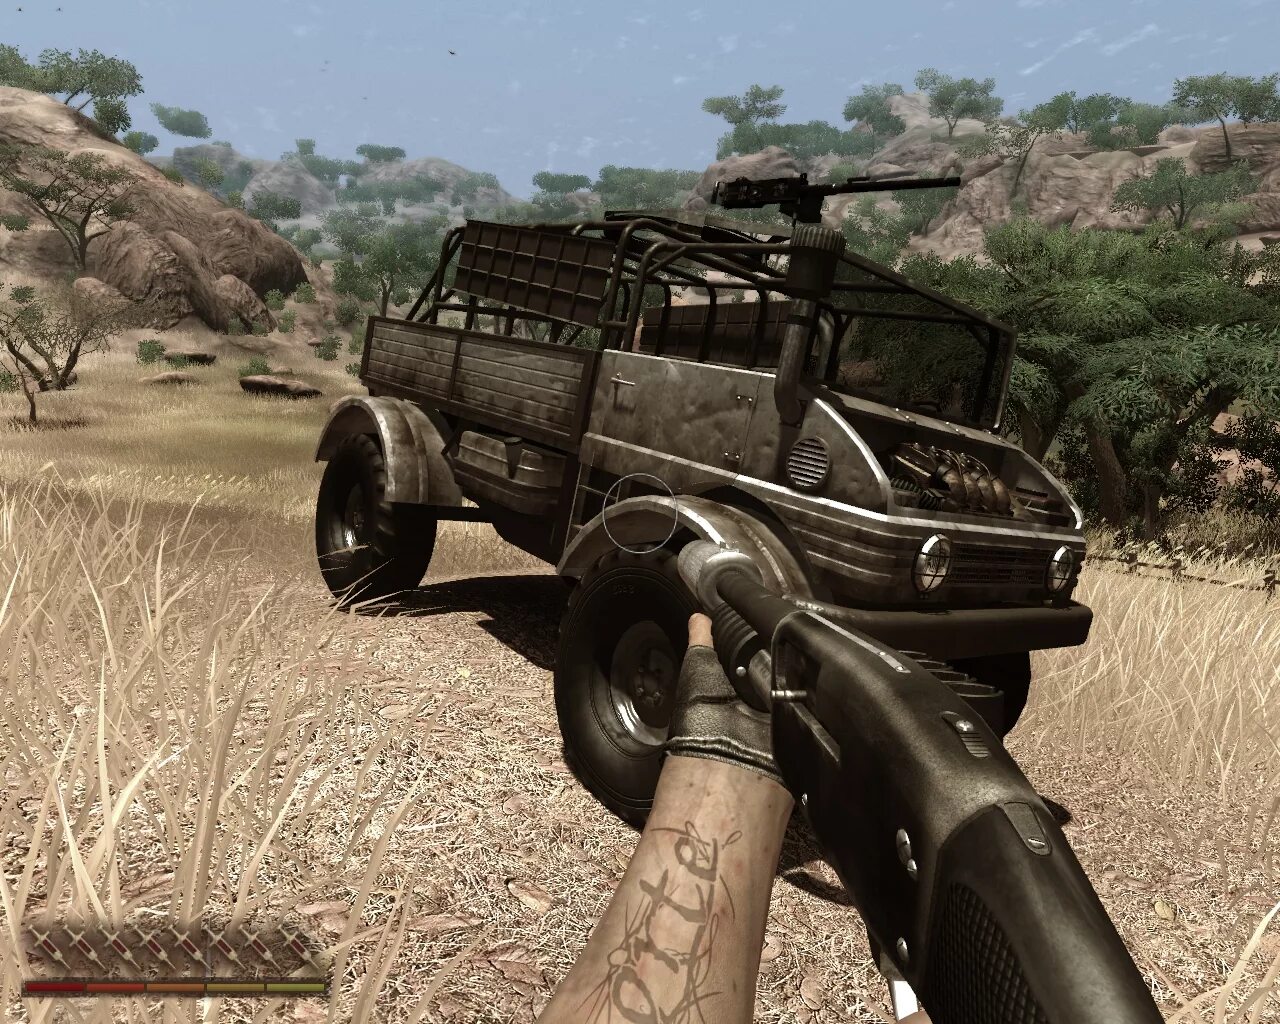 Far Cry 2 Fortune's Pack. Фар край 2 1.03. Jeep far Cry 2. Far Cry 6 Миниган. Far cry 2 моды